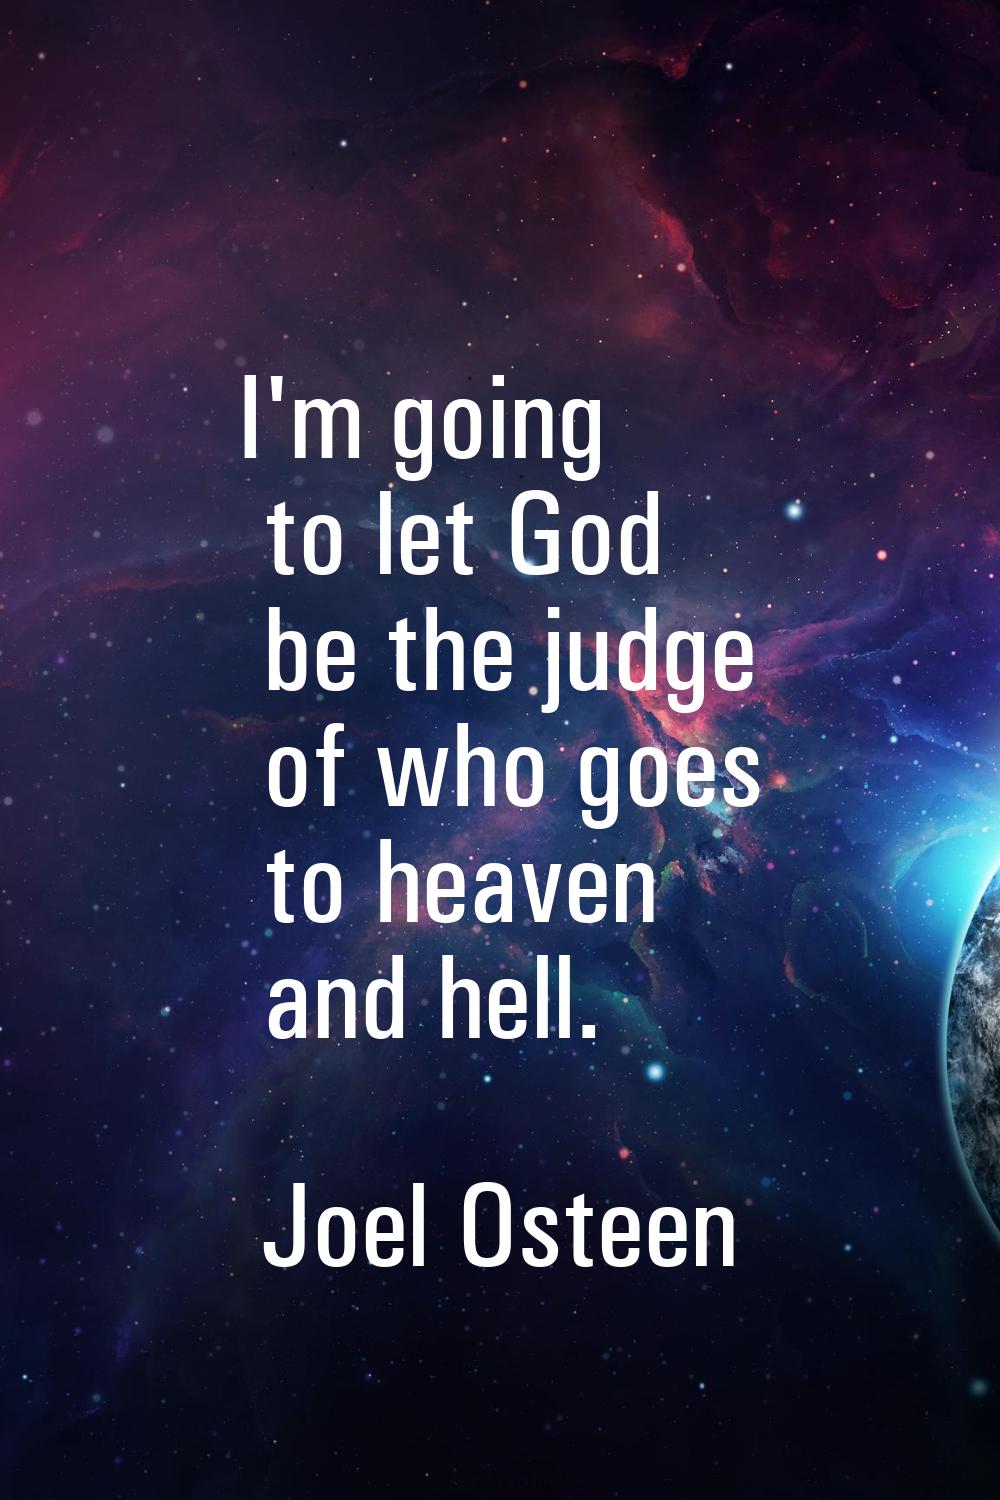 I'm going to let God be the judge of who goes to heaven and hell.